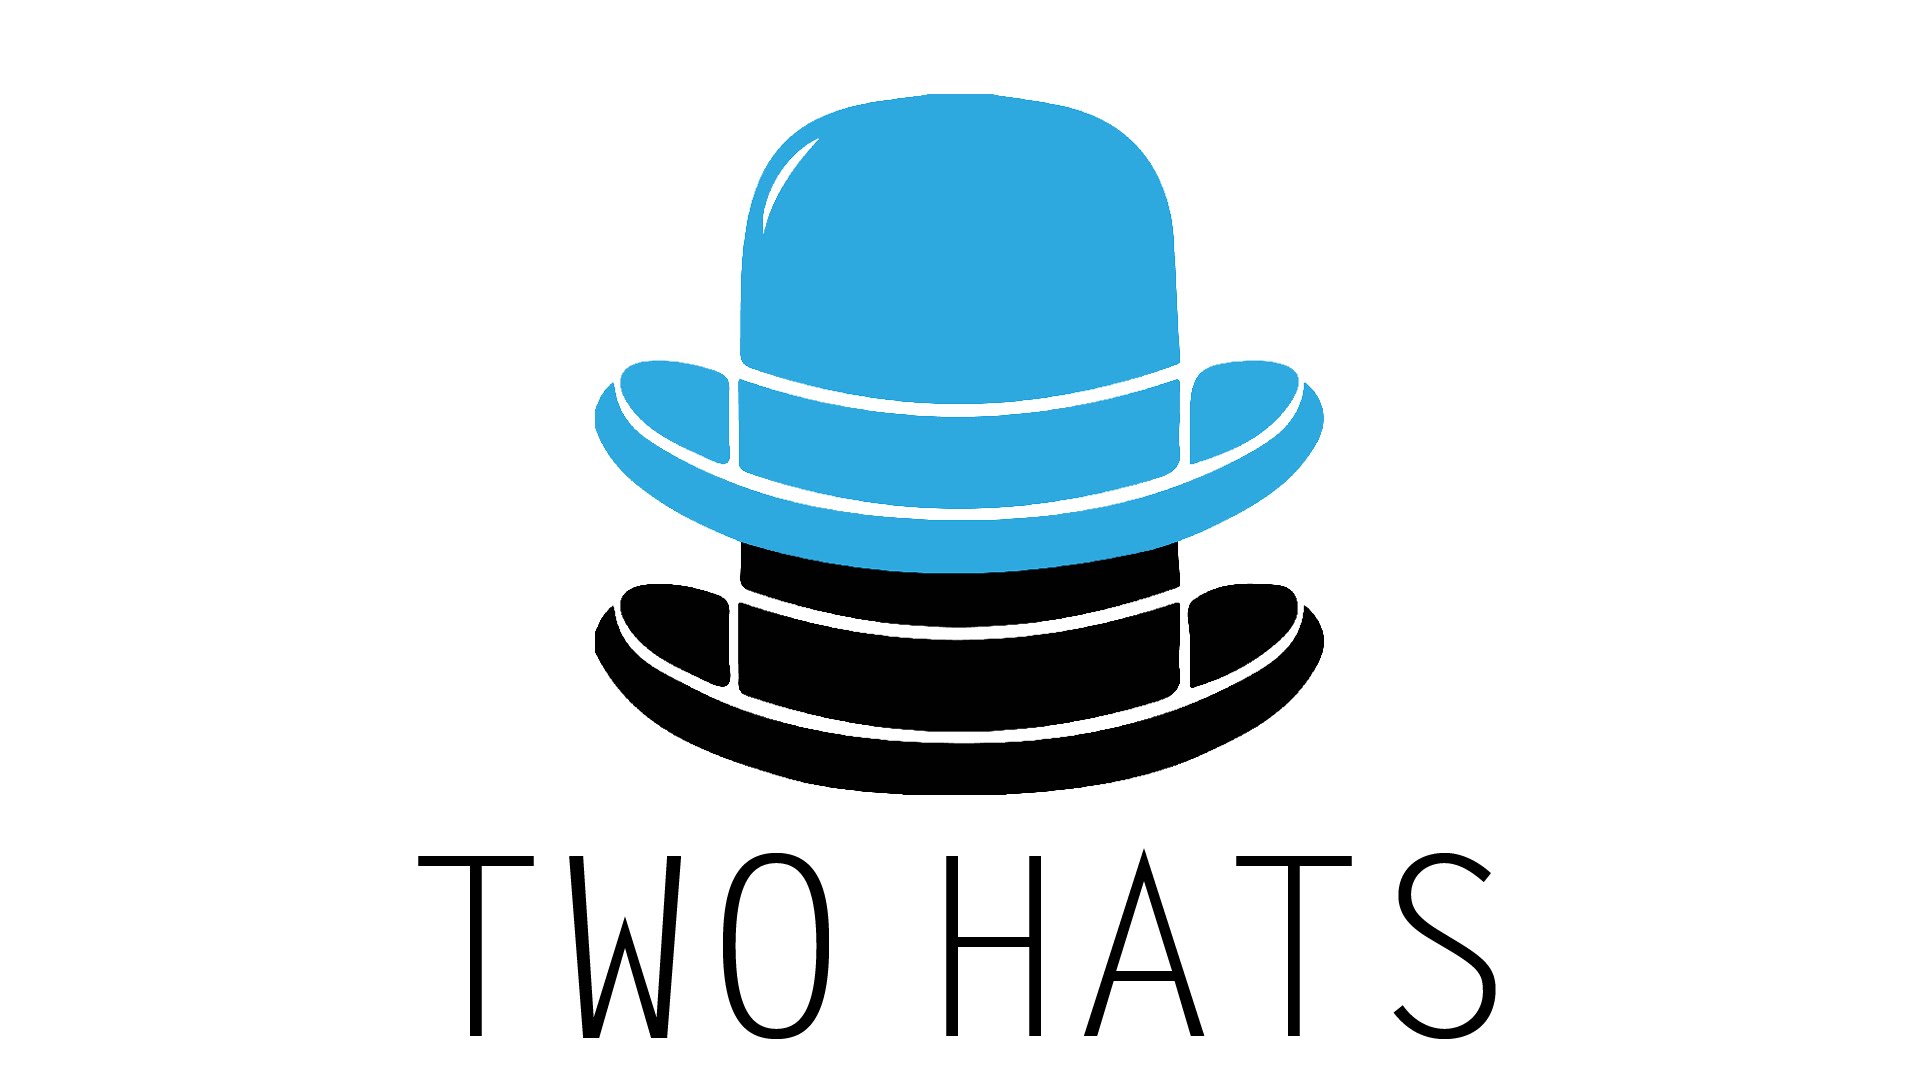 Two hat. Two hats. Wearing two hats. White hat аватар. Логотип hate hats.